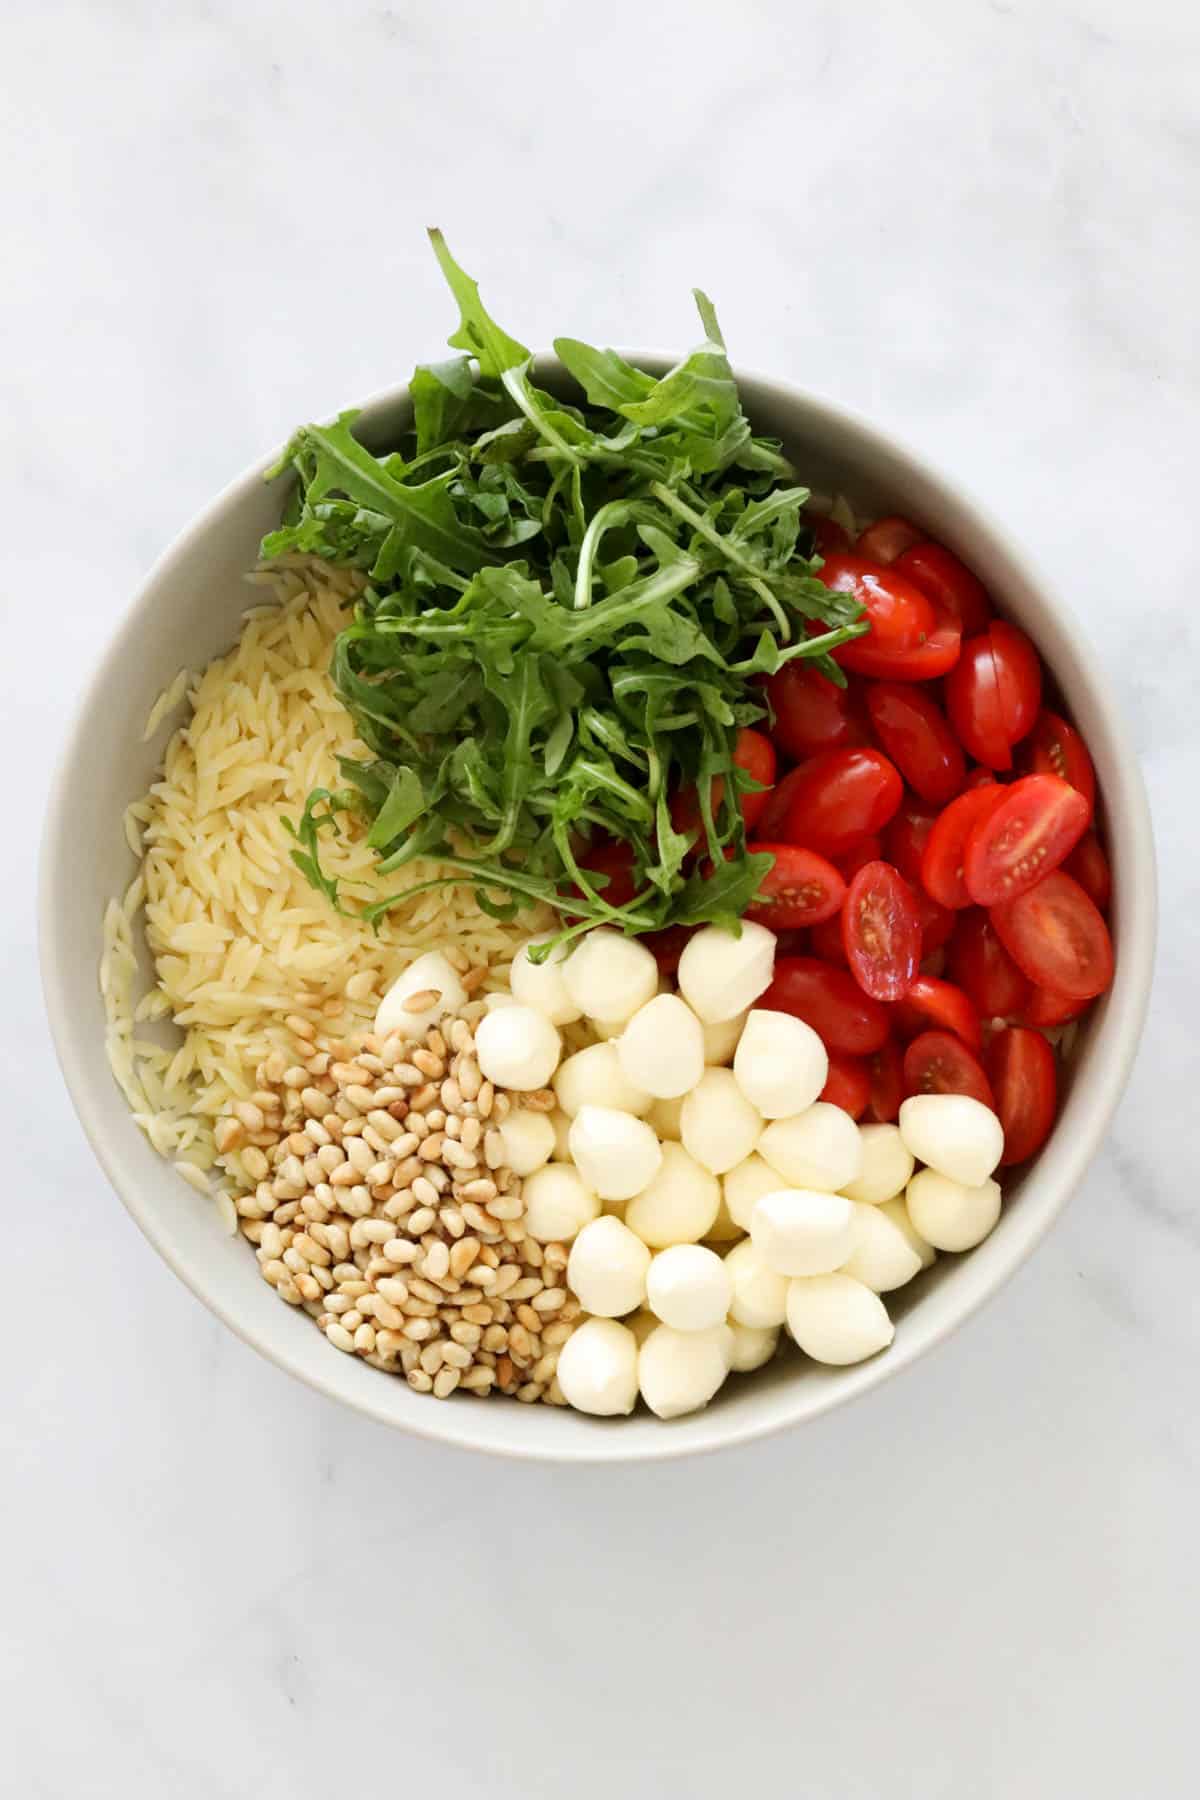 All ingredients for orzo salad in a bowl before being combined.